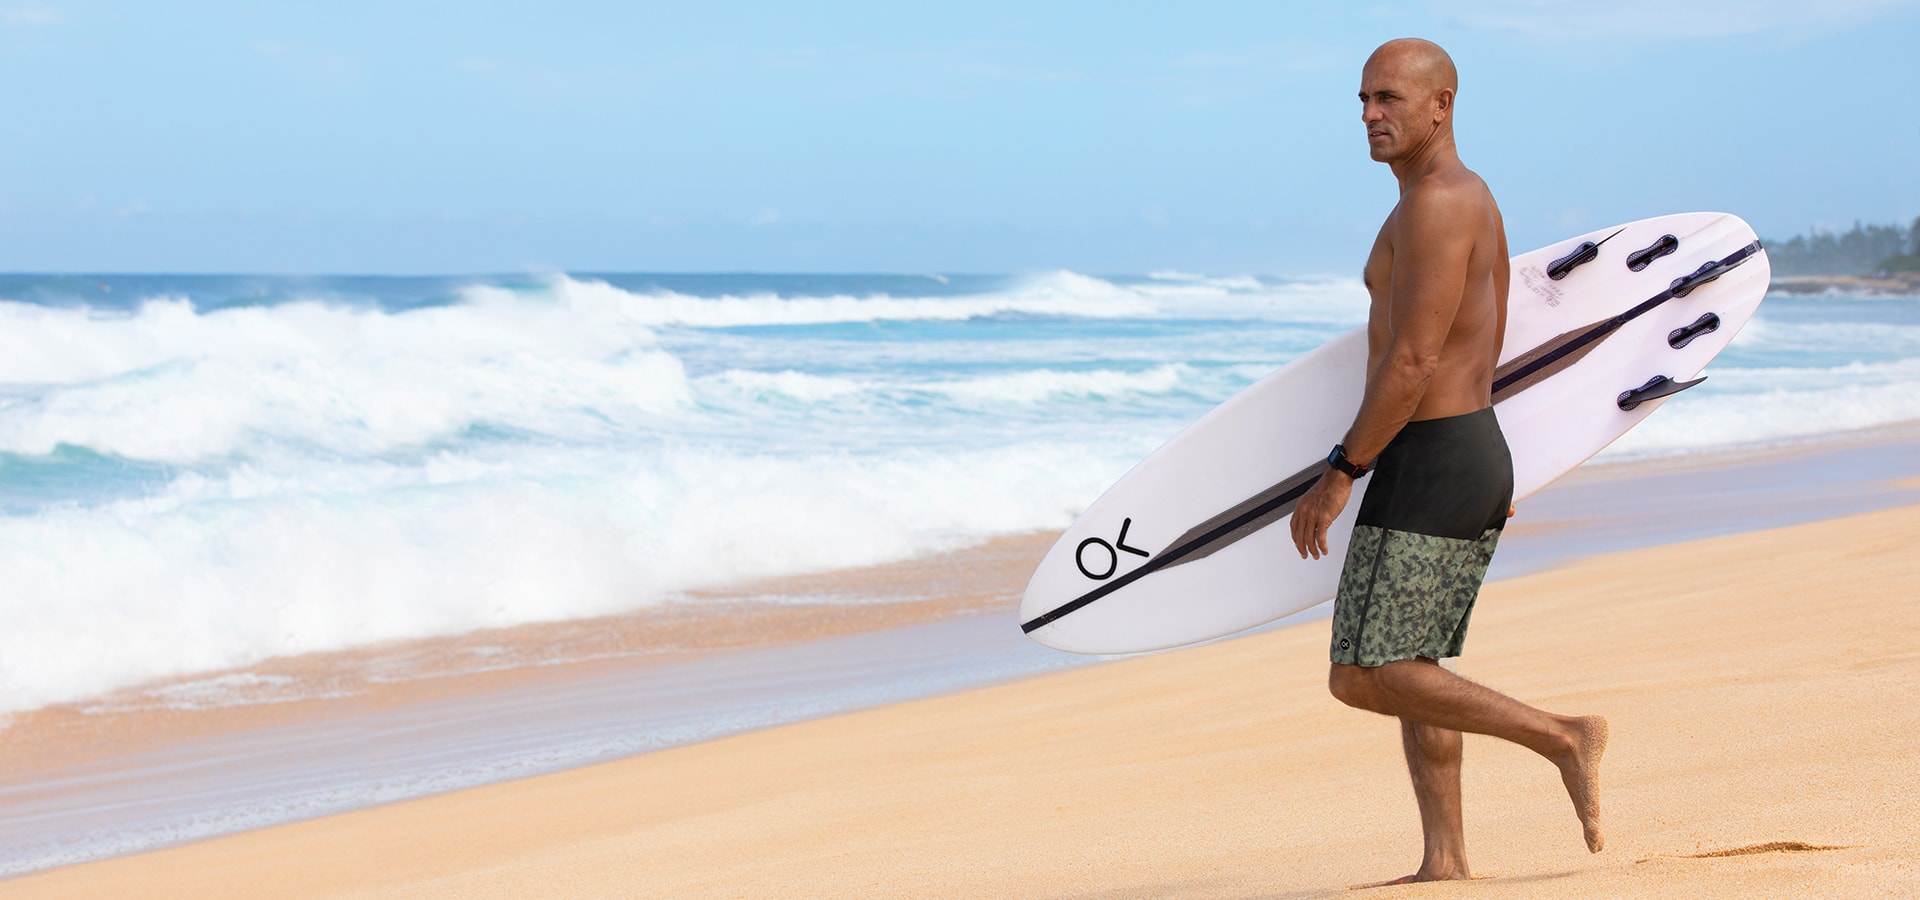 Kelly Slater reckons there are more surfers in the world than golfers